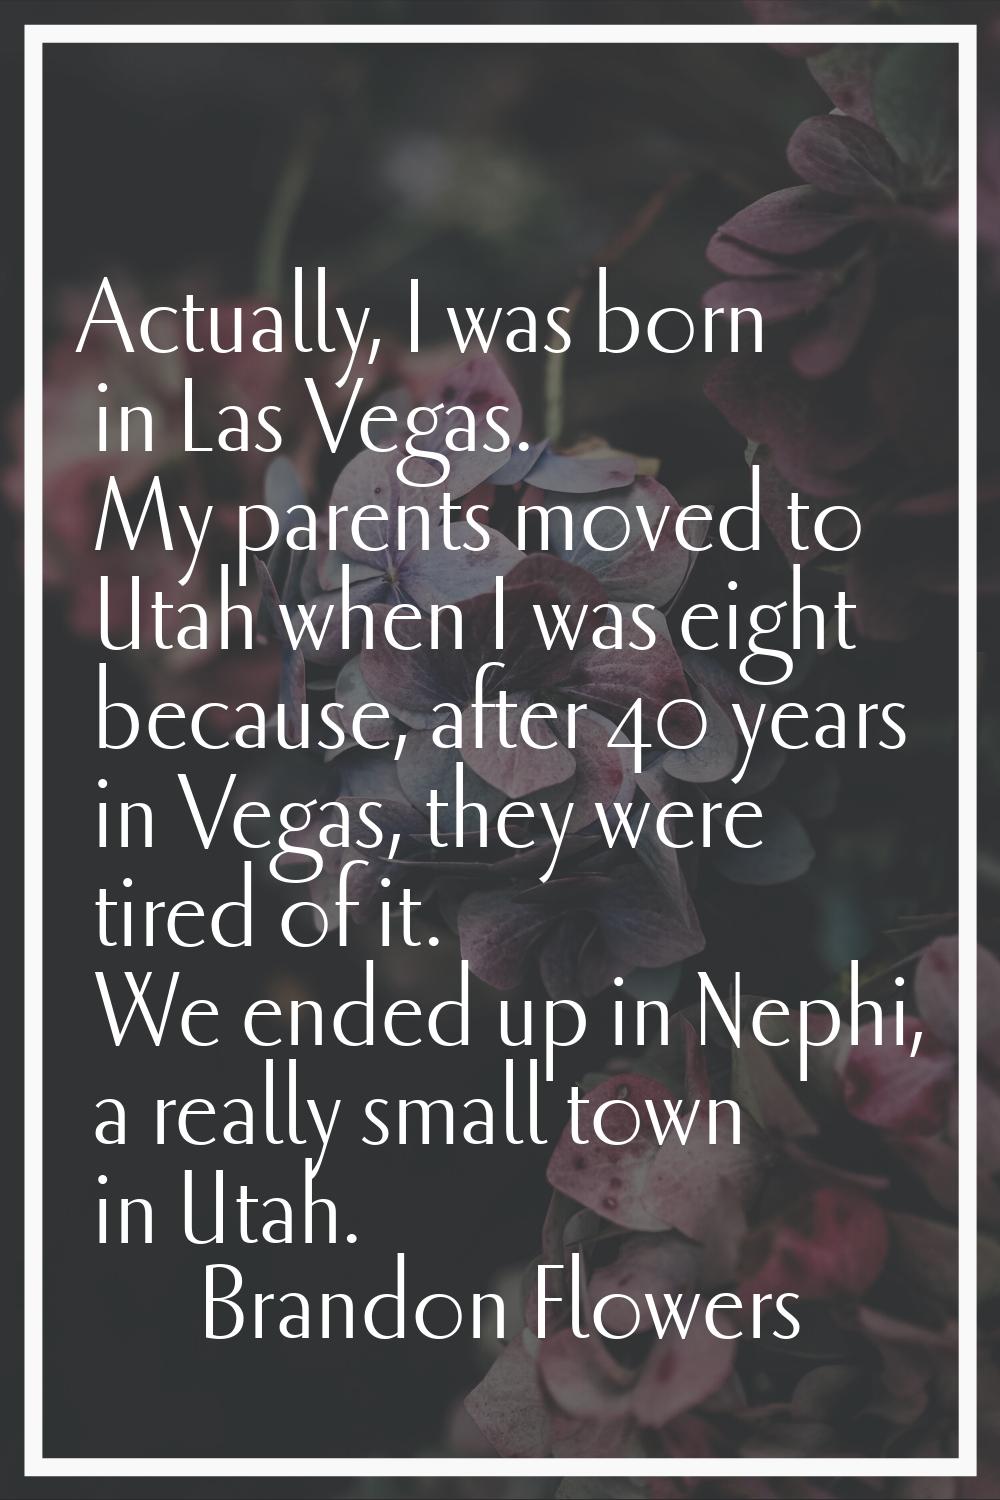 Actually, I was born in Las Vegas. My parents moved to Utah when I was eight because, after 40 year